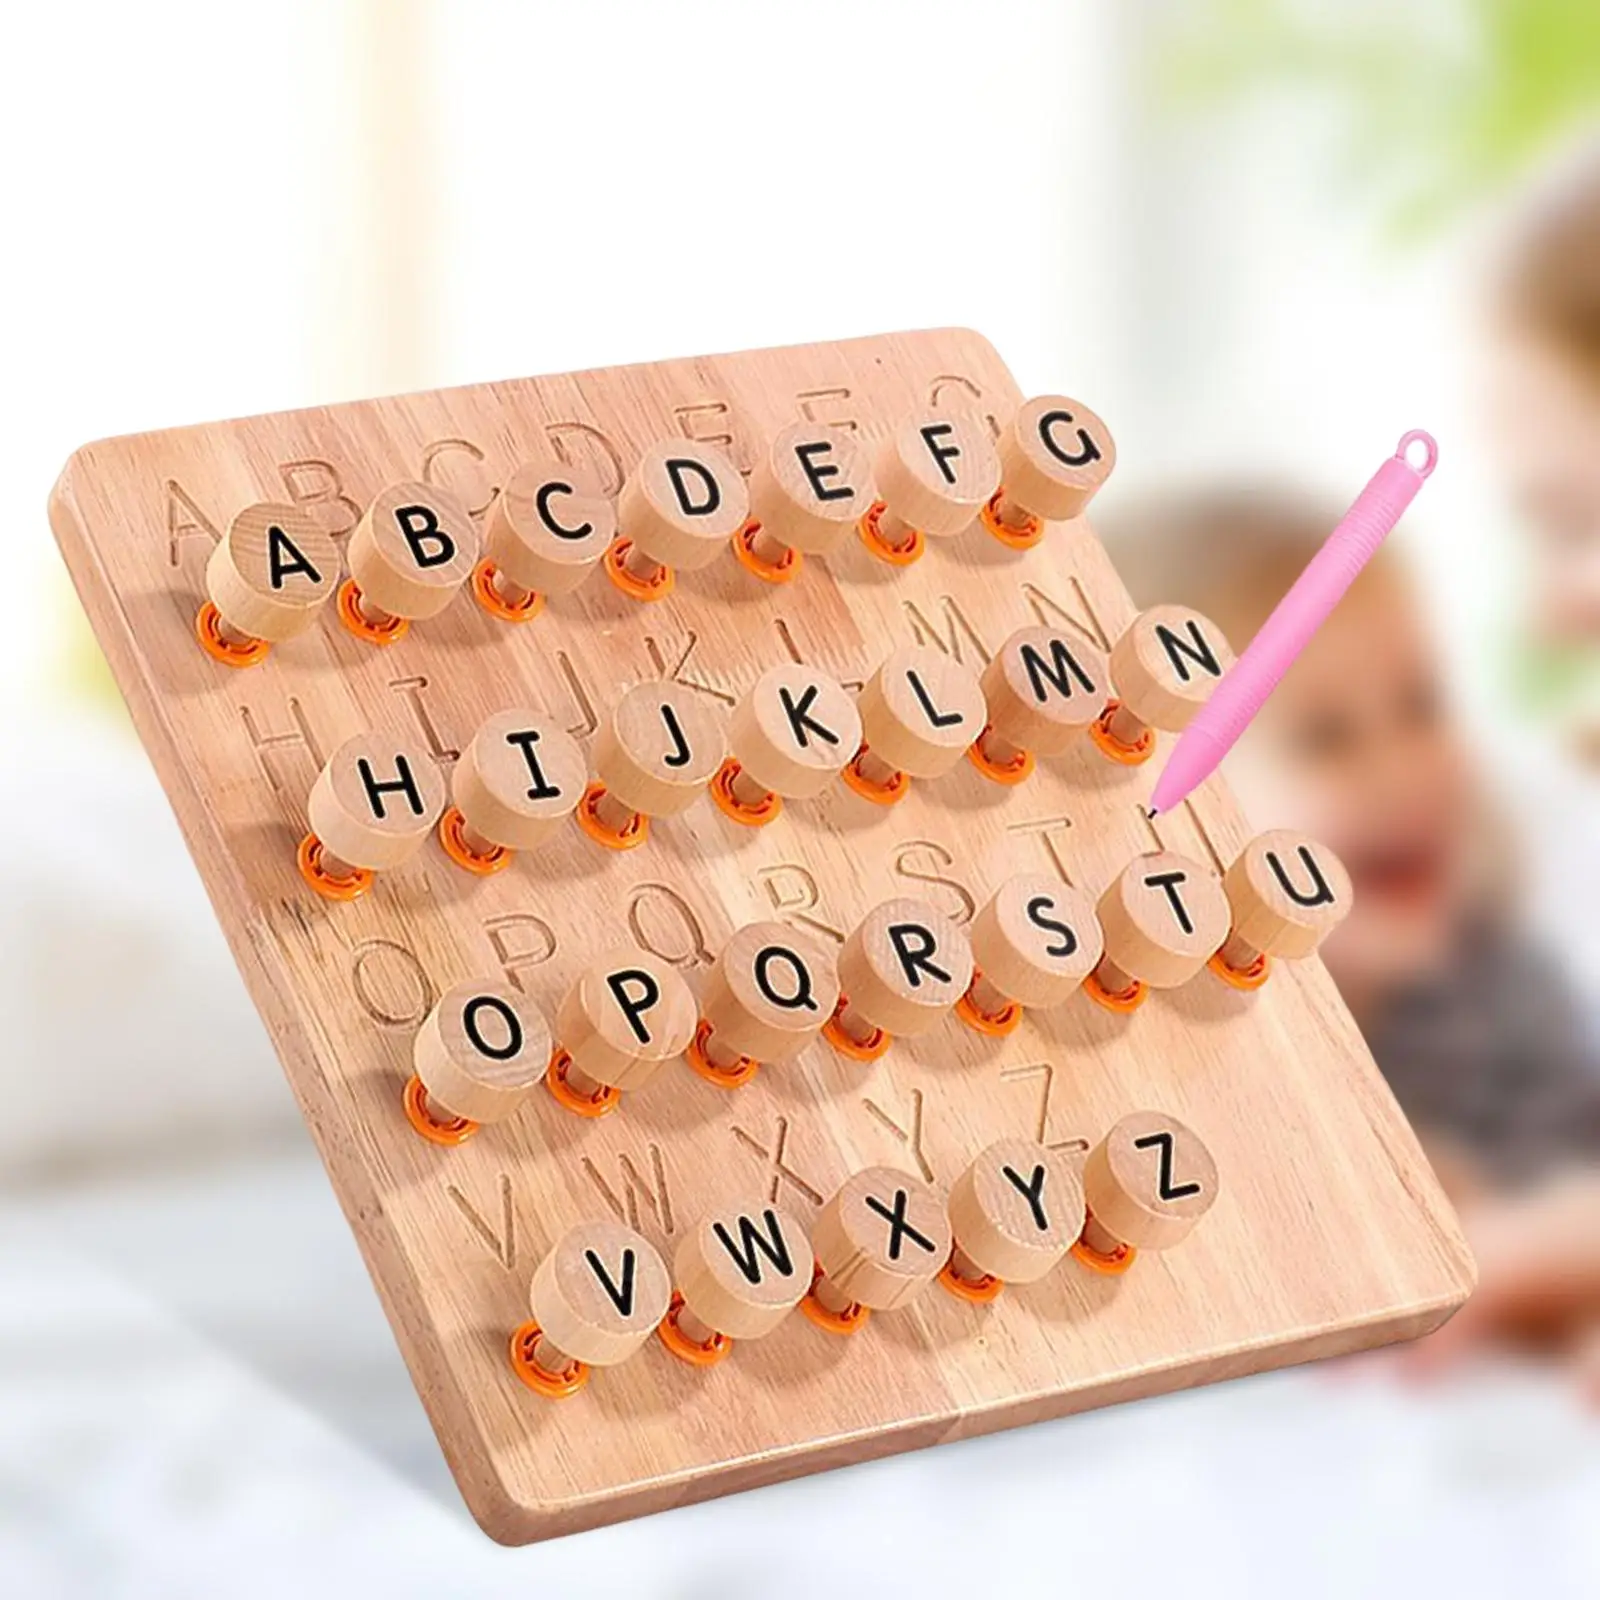 Wooden Alphabet Tracing Board Puzzles Developmental Toys Board Game Teaching Aids Tool Sensory Play for Children Toddler Boys